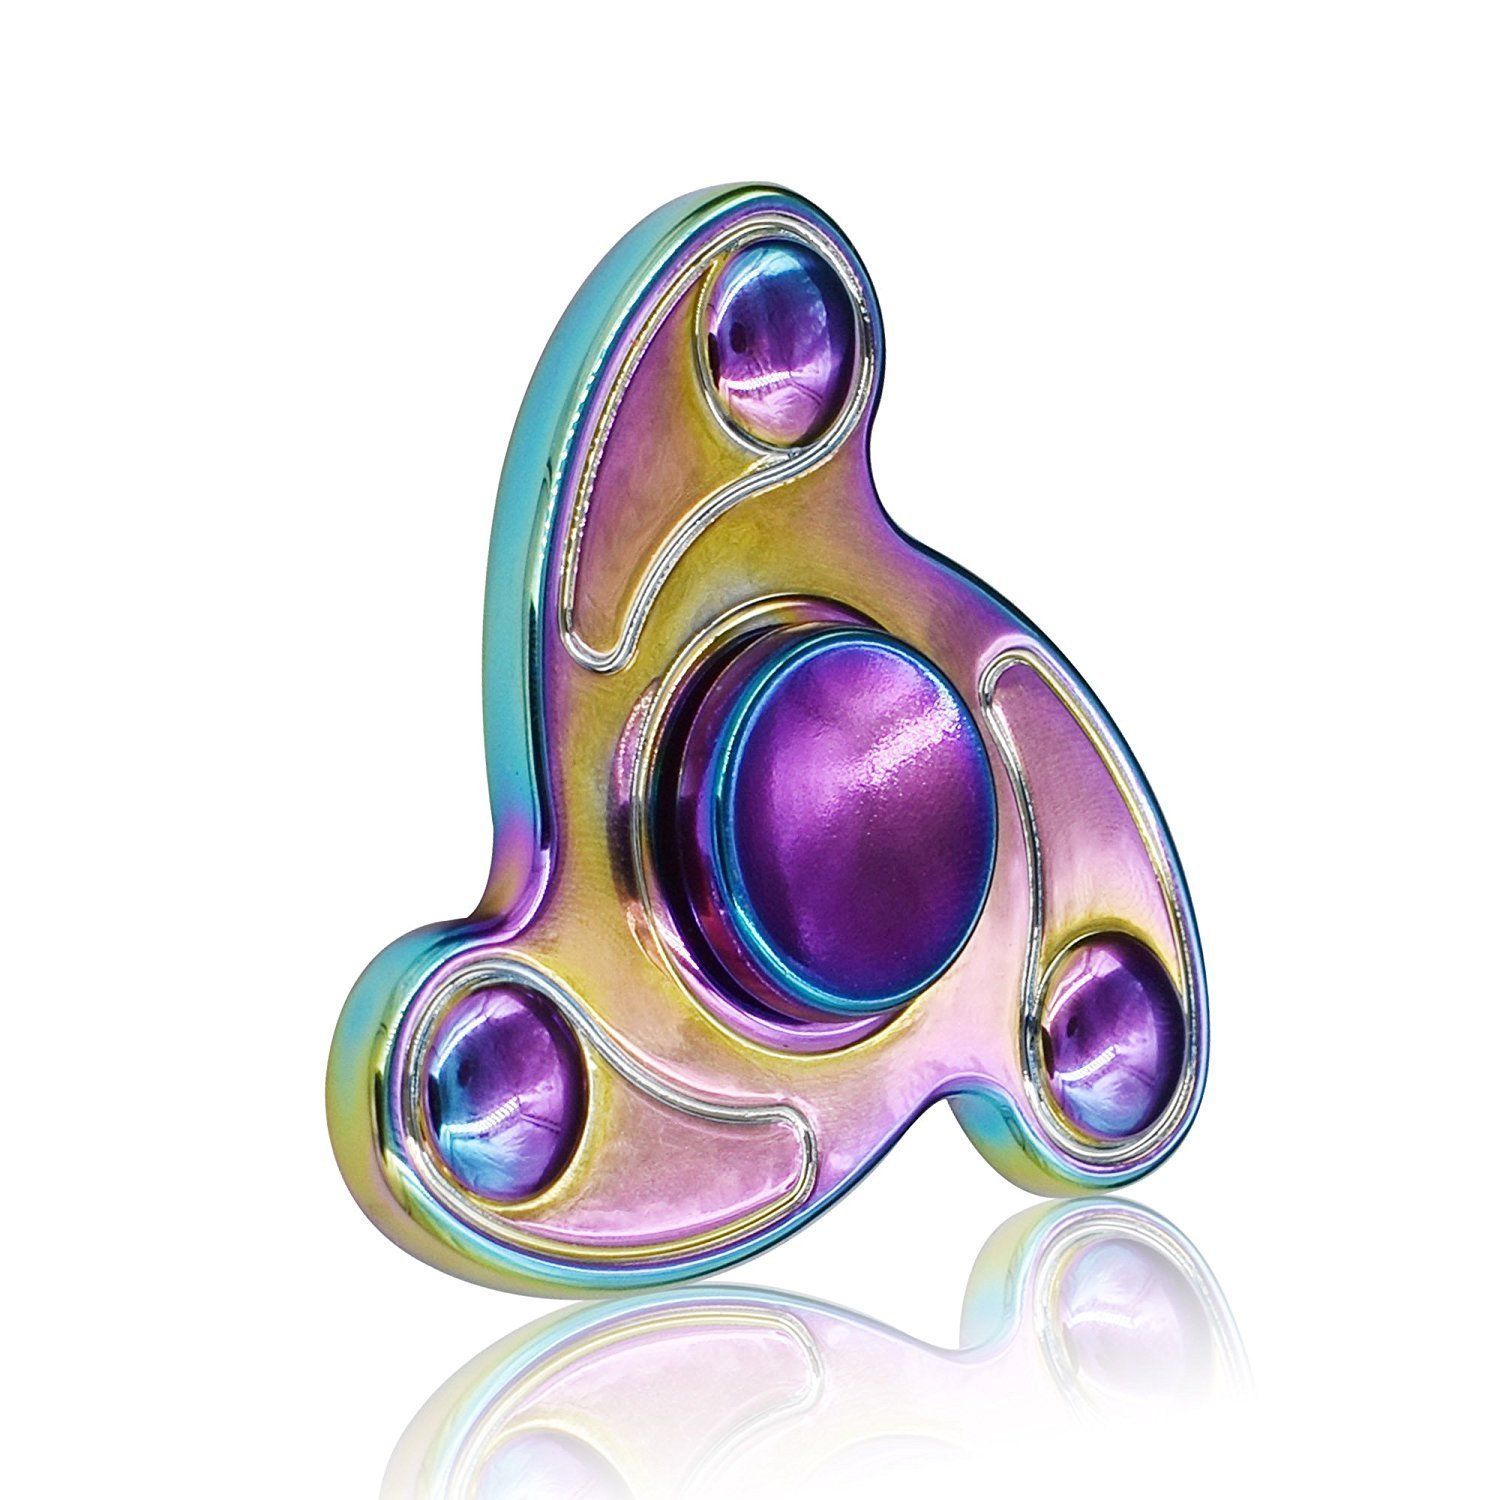 YGJ Spinner Fidget EDC ADHD Focus Toy Ultra Durable High Speed 3-7 Minute Spins Precision zinc alloy material (Rainbow-Dart)